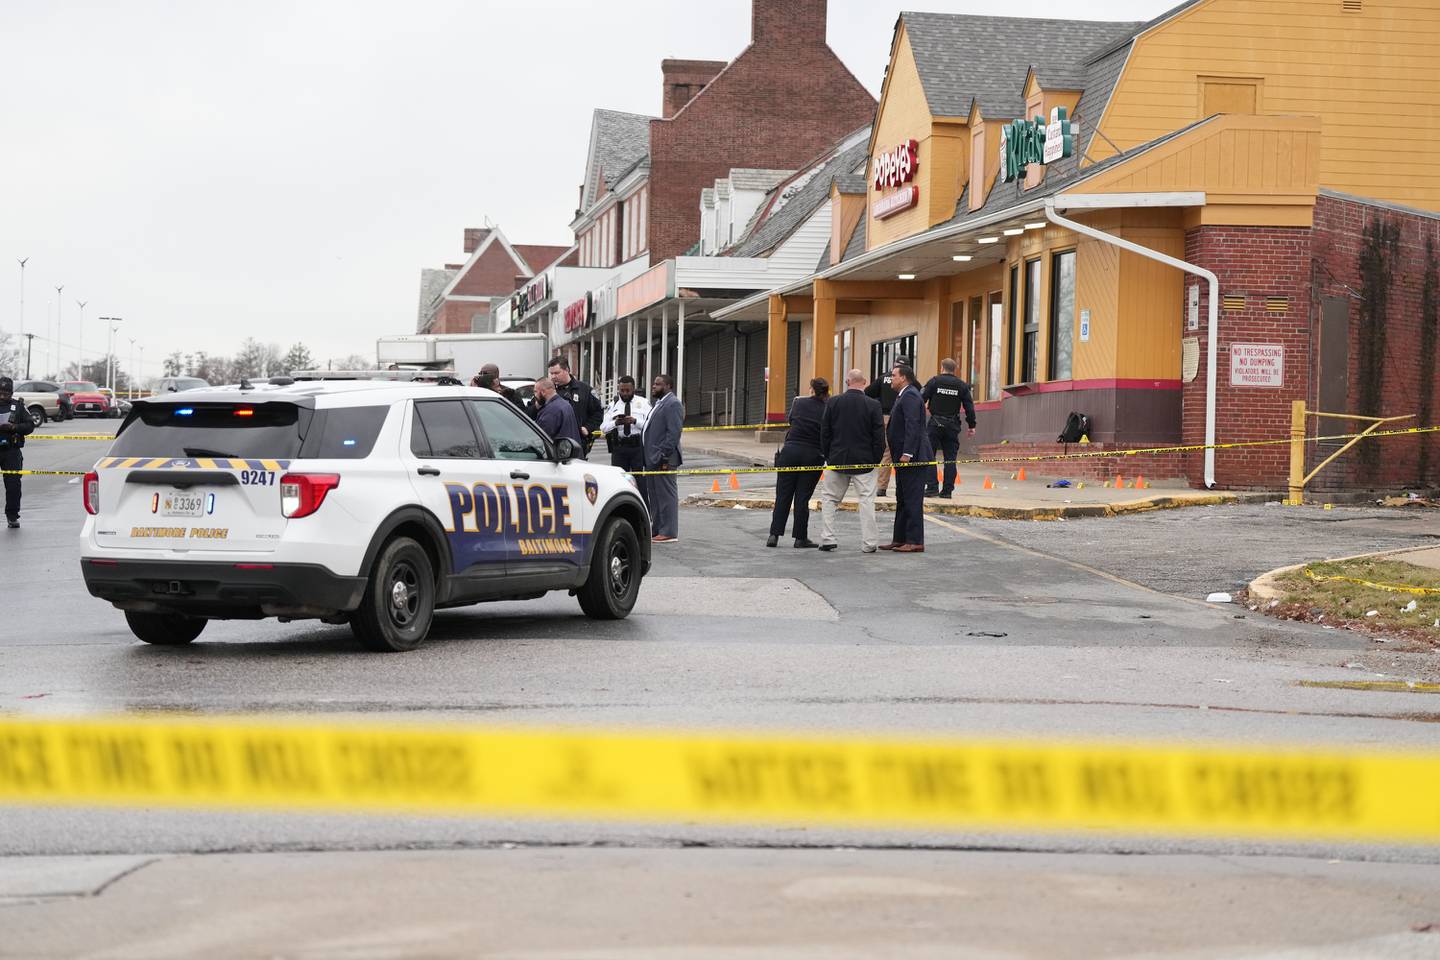 One person has died and four others were injured in a mass shooting at the Edmondson Village shopping center Wednesday morning.